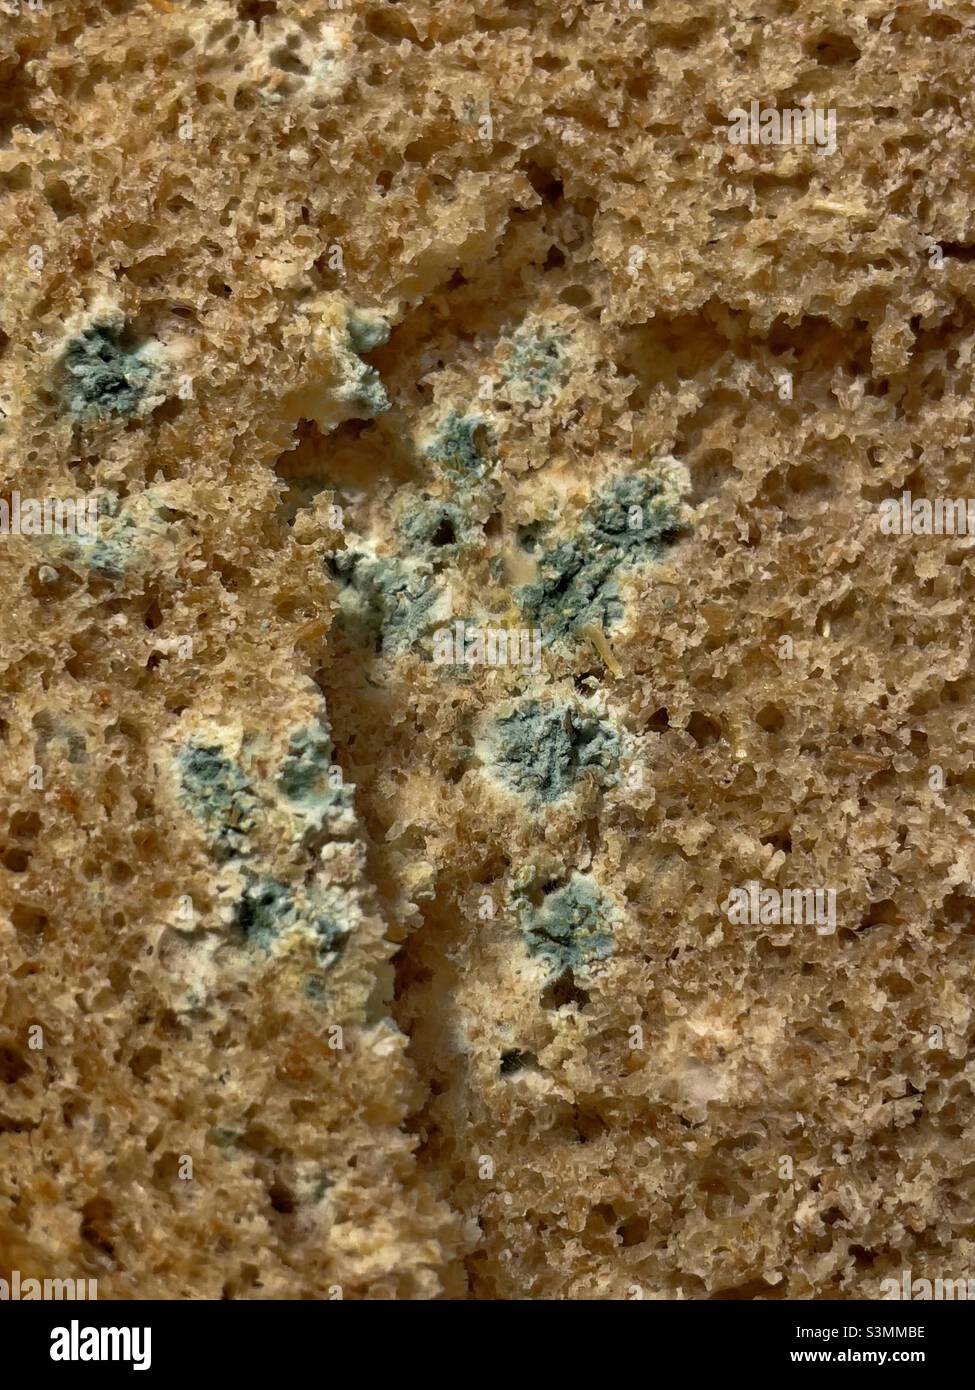 A slice of brown bread exhibiting blue mould in close up Stock Photo